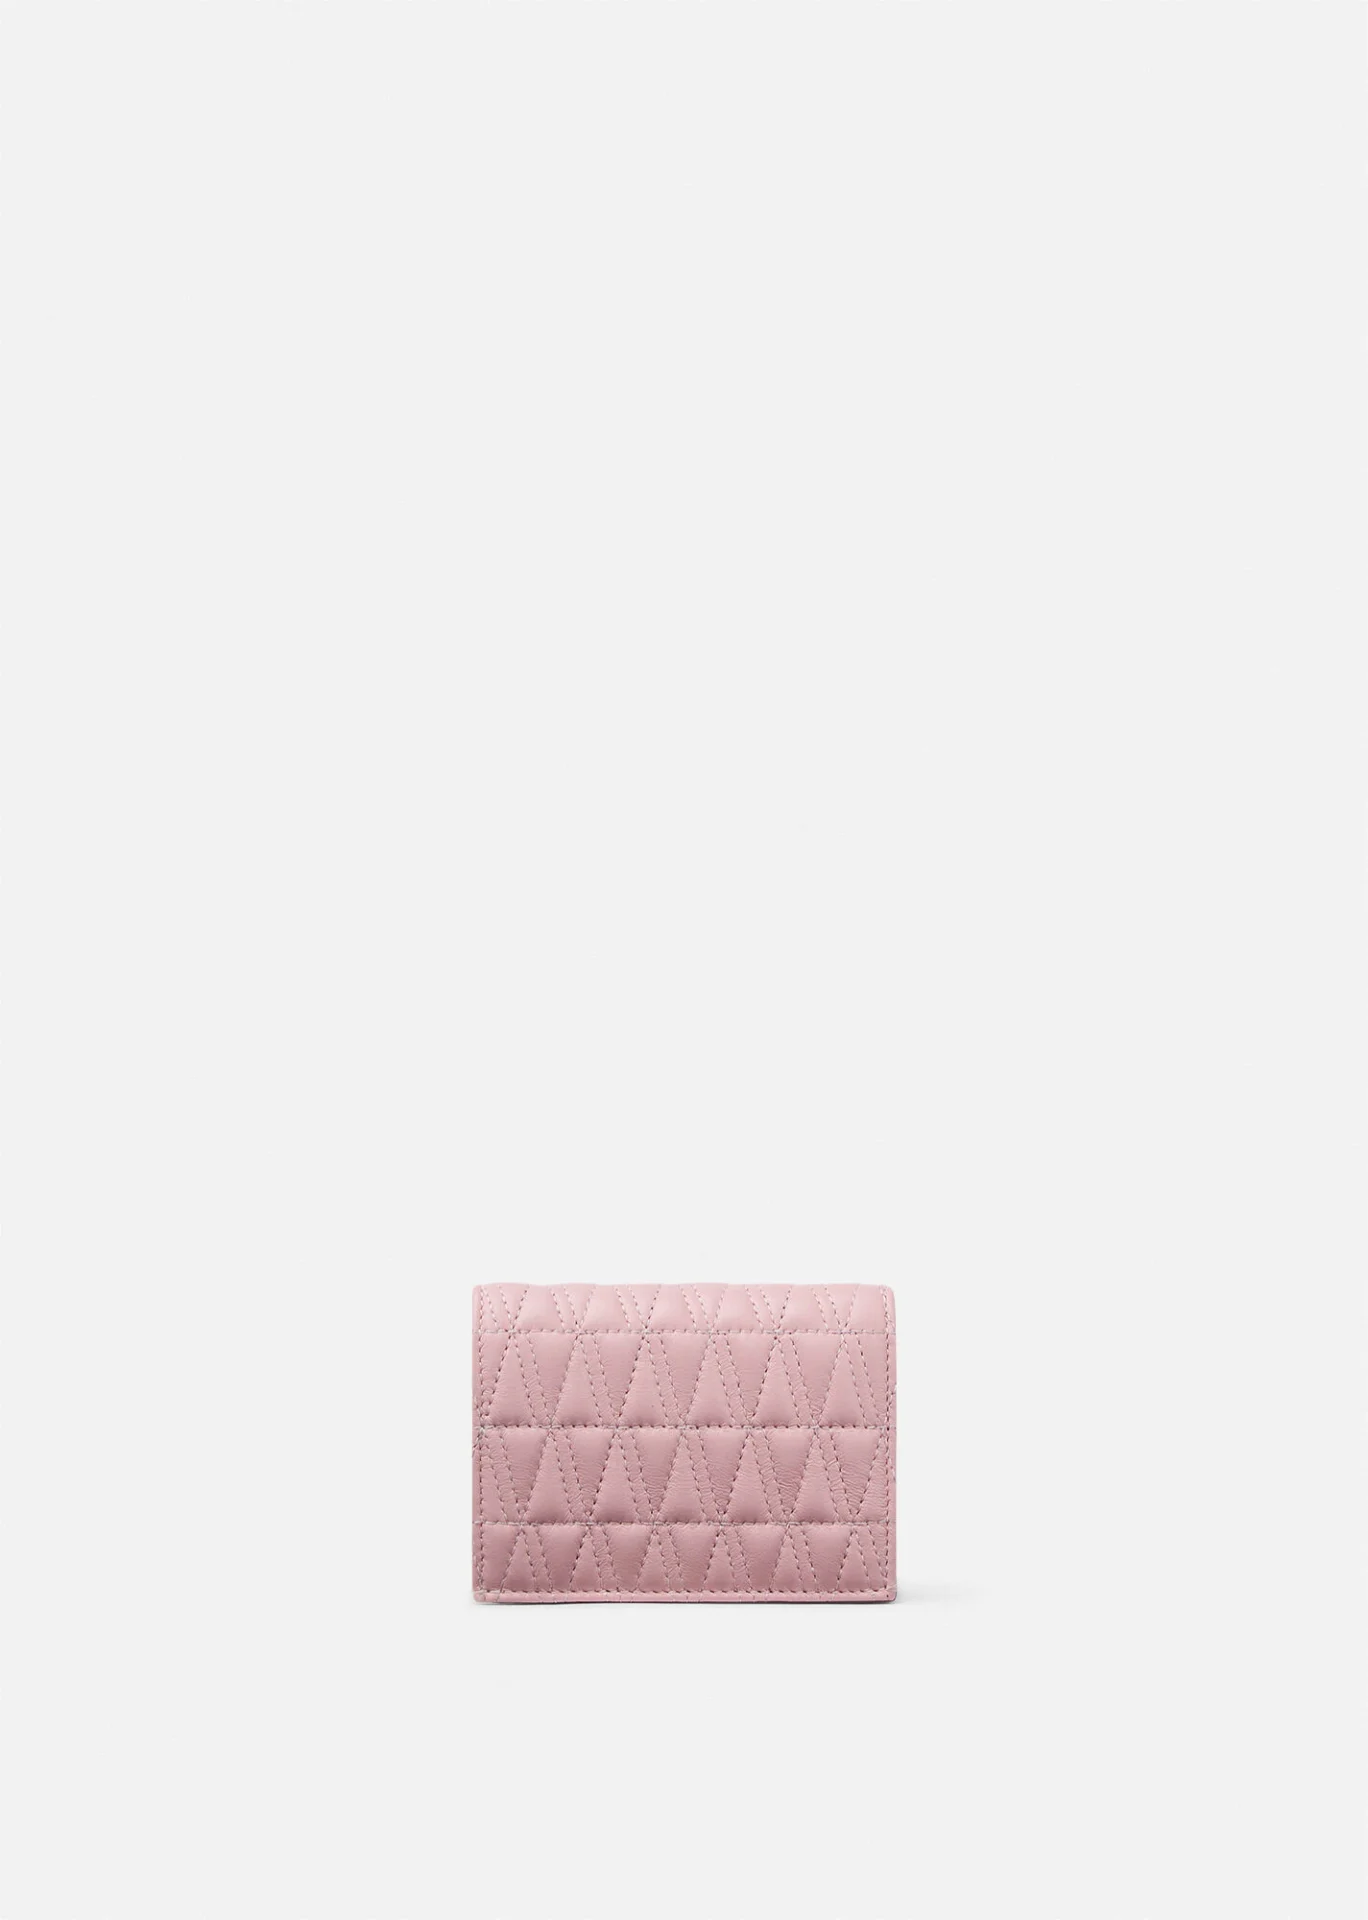 A versace quilted lambskin leather wallet in pink